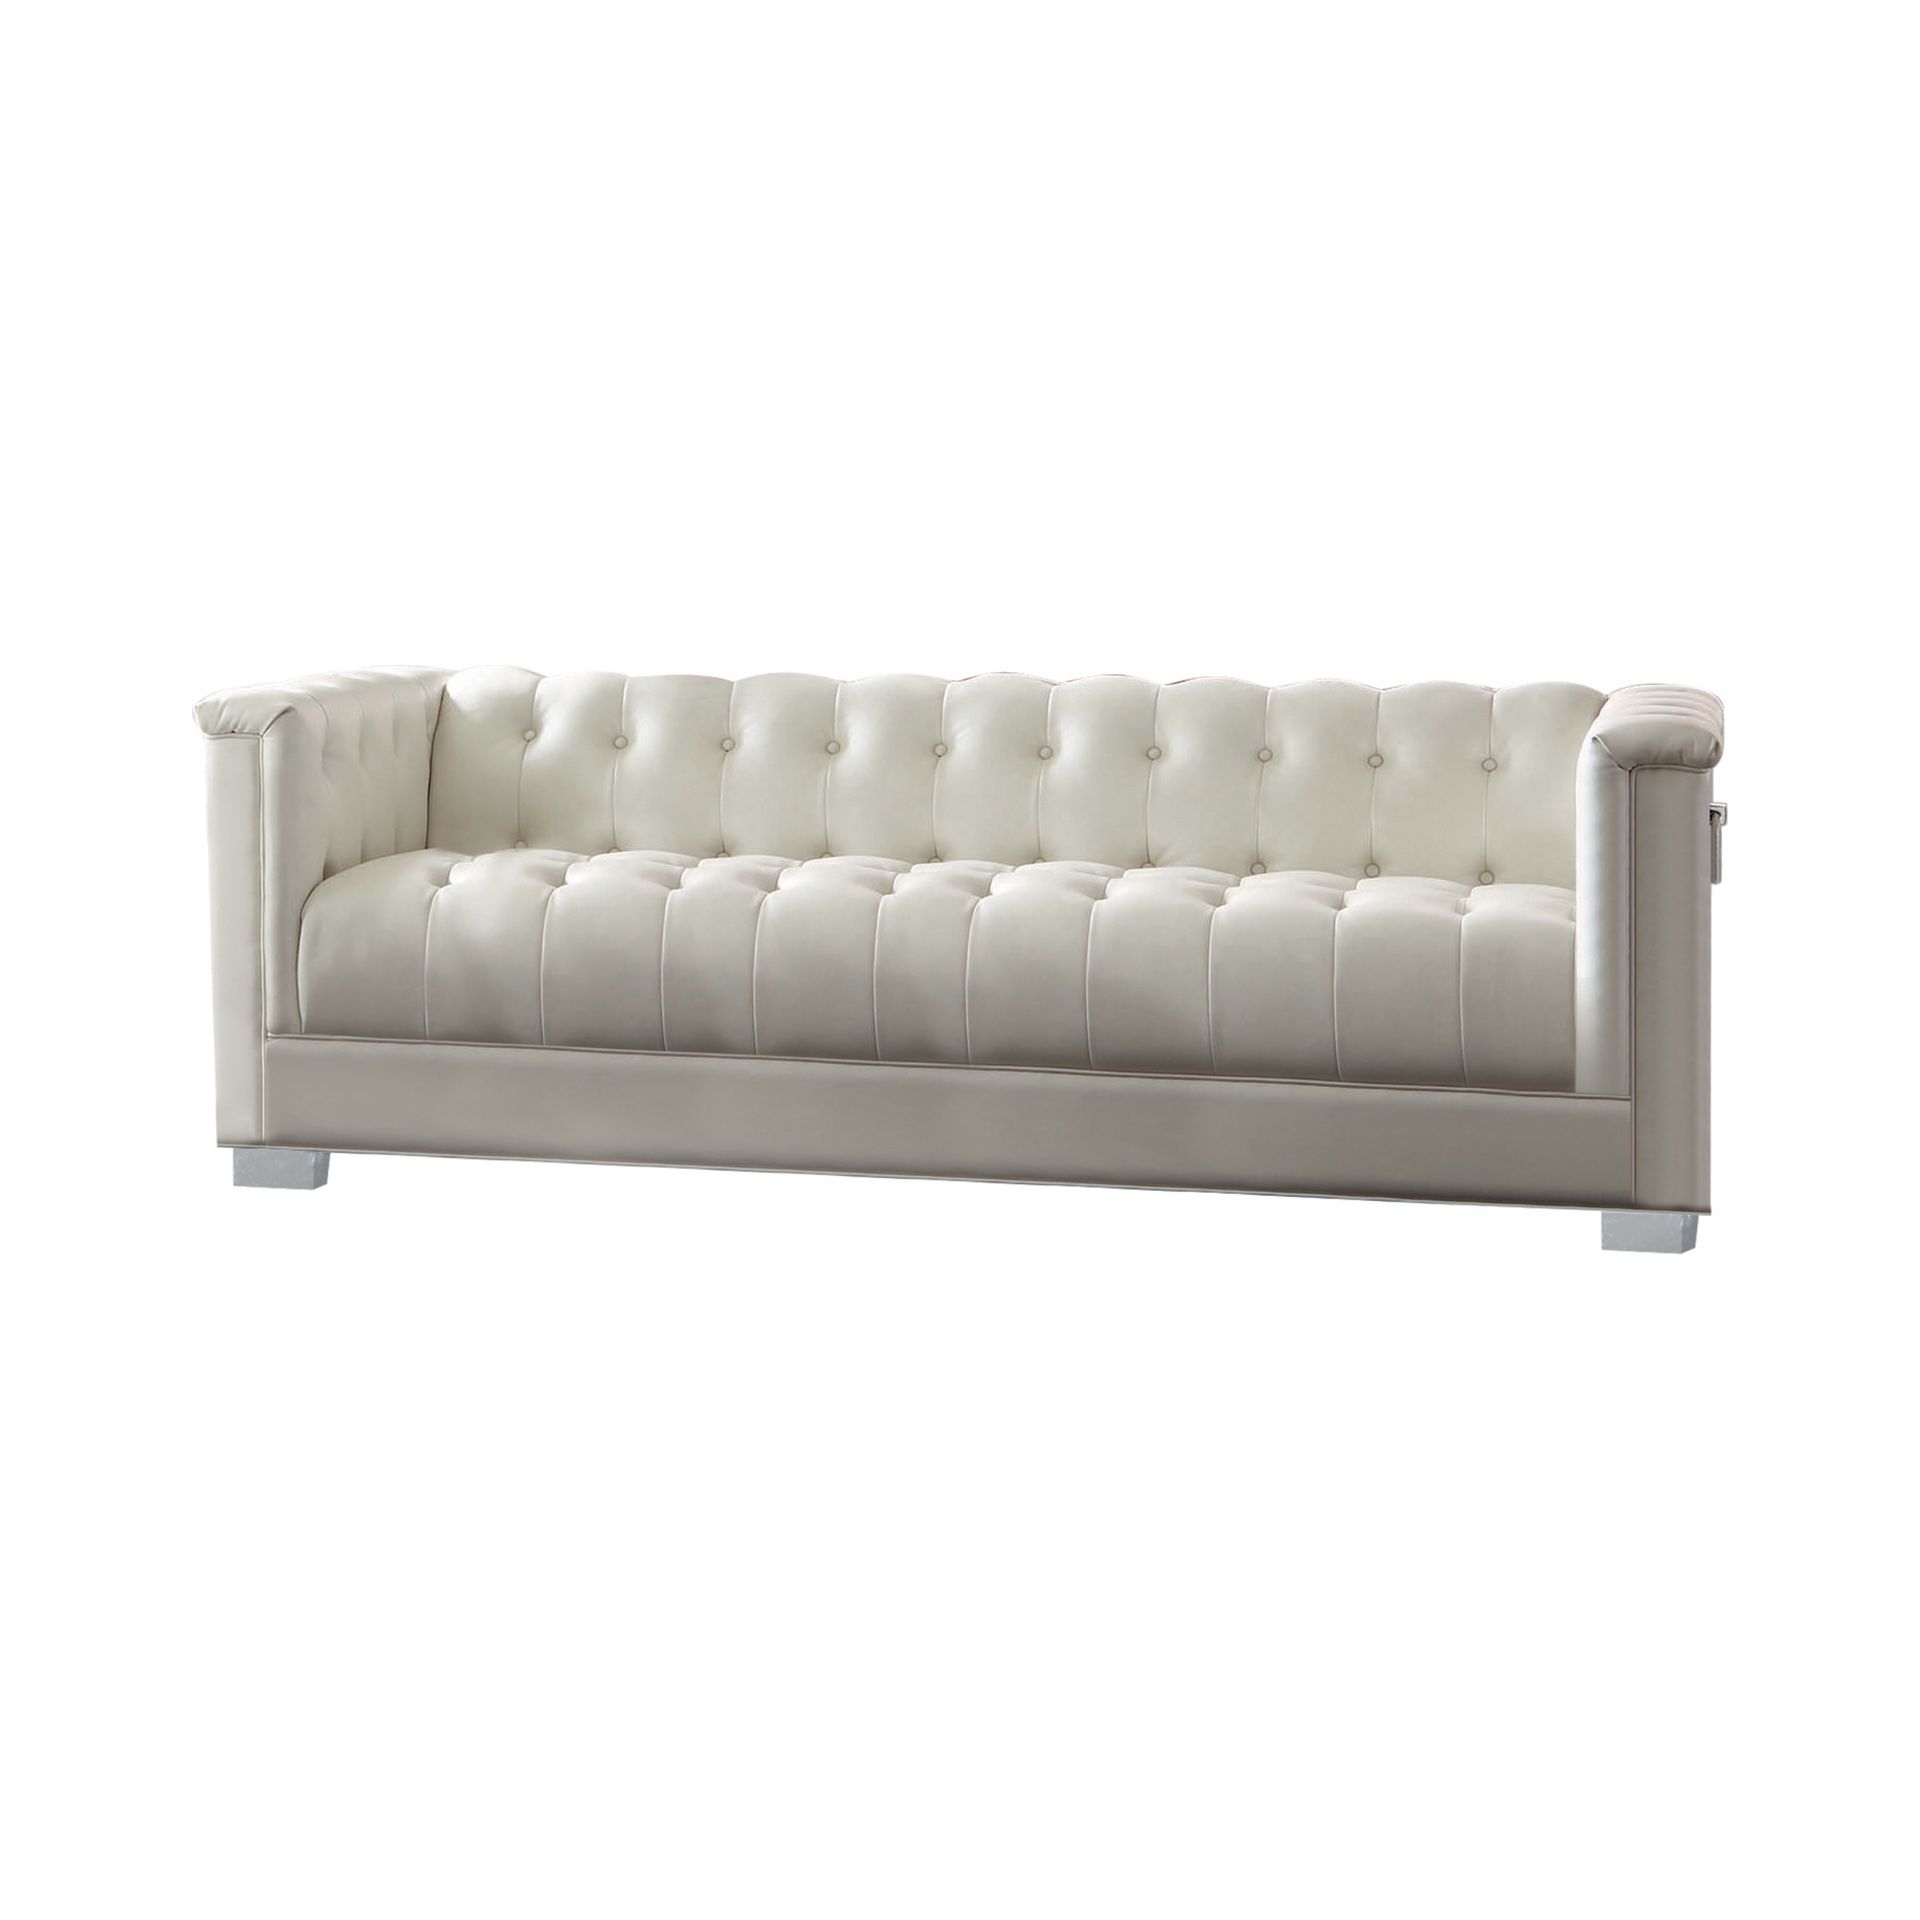 White Leatherette Sofa! Matching Loveseat and Chair available! Brand New!